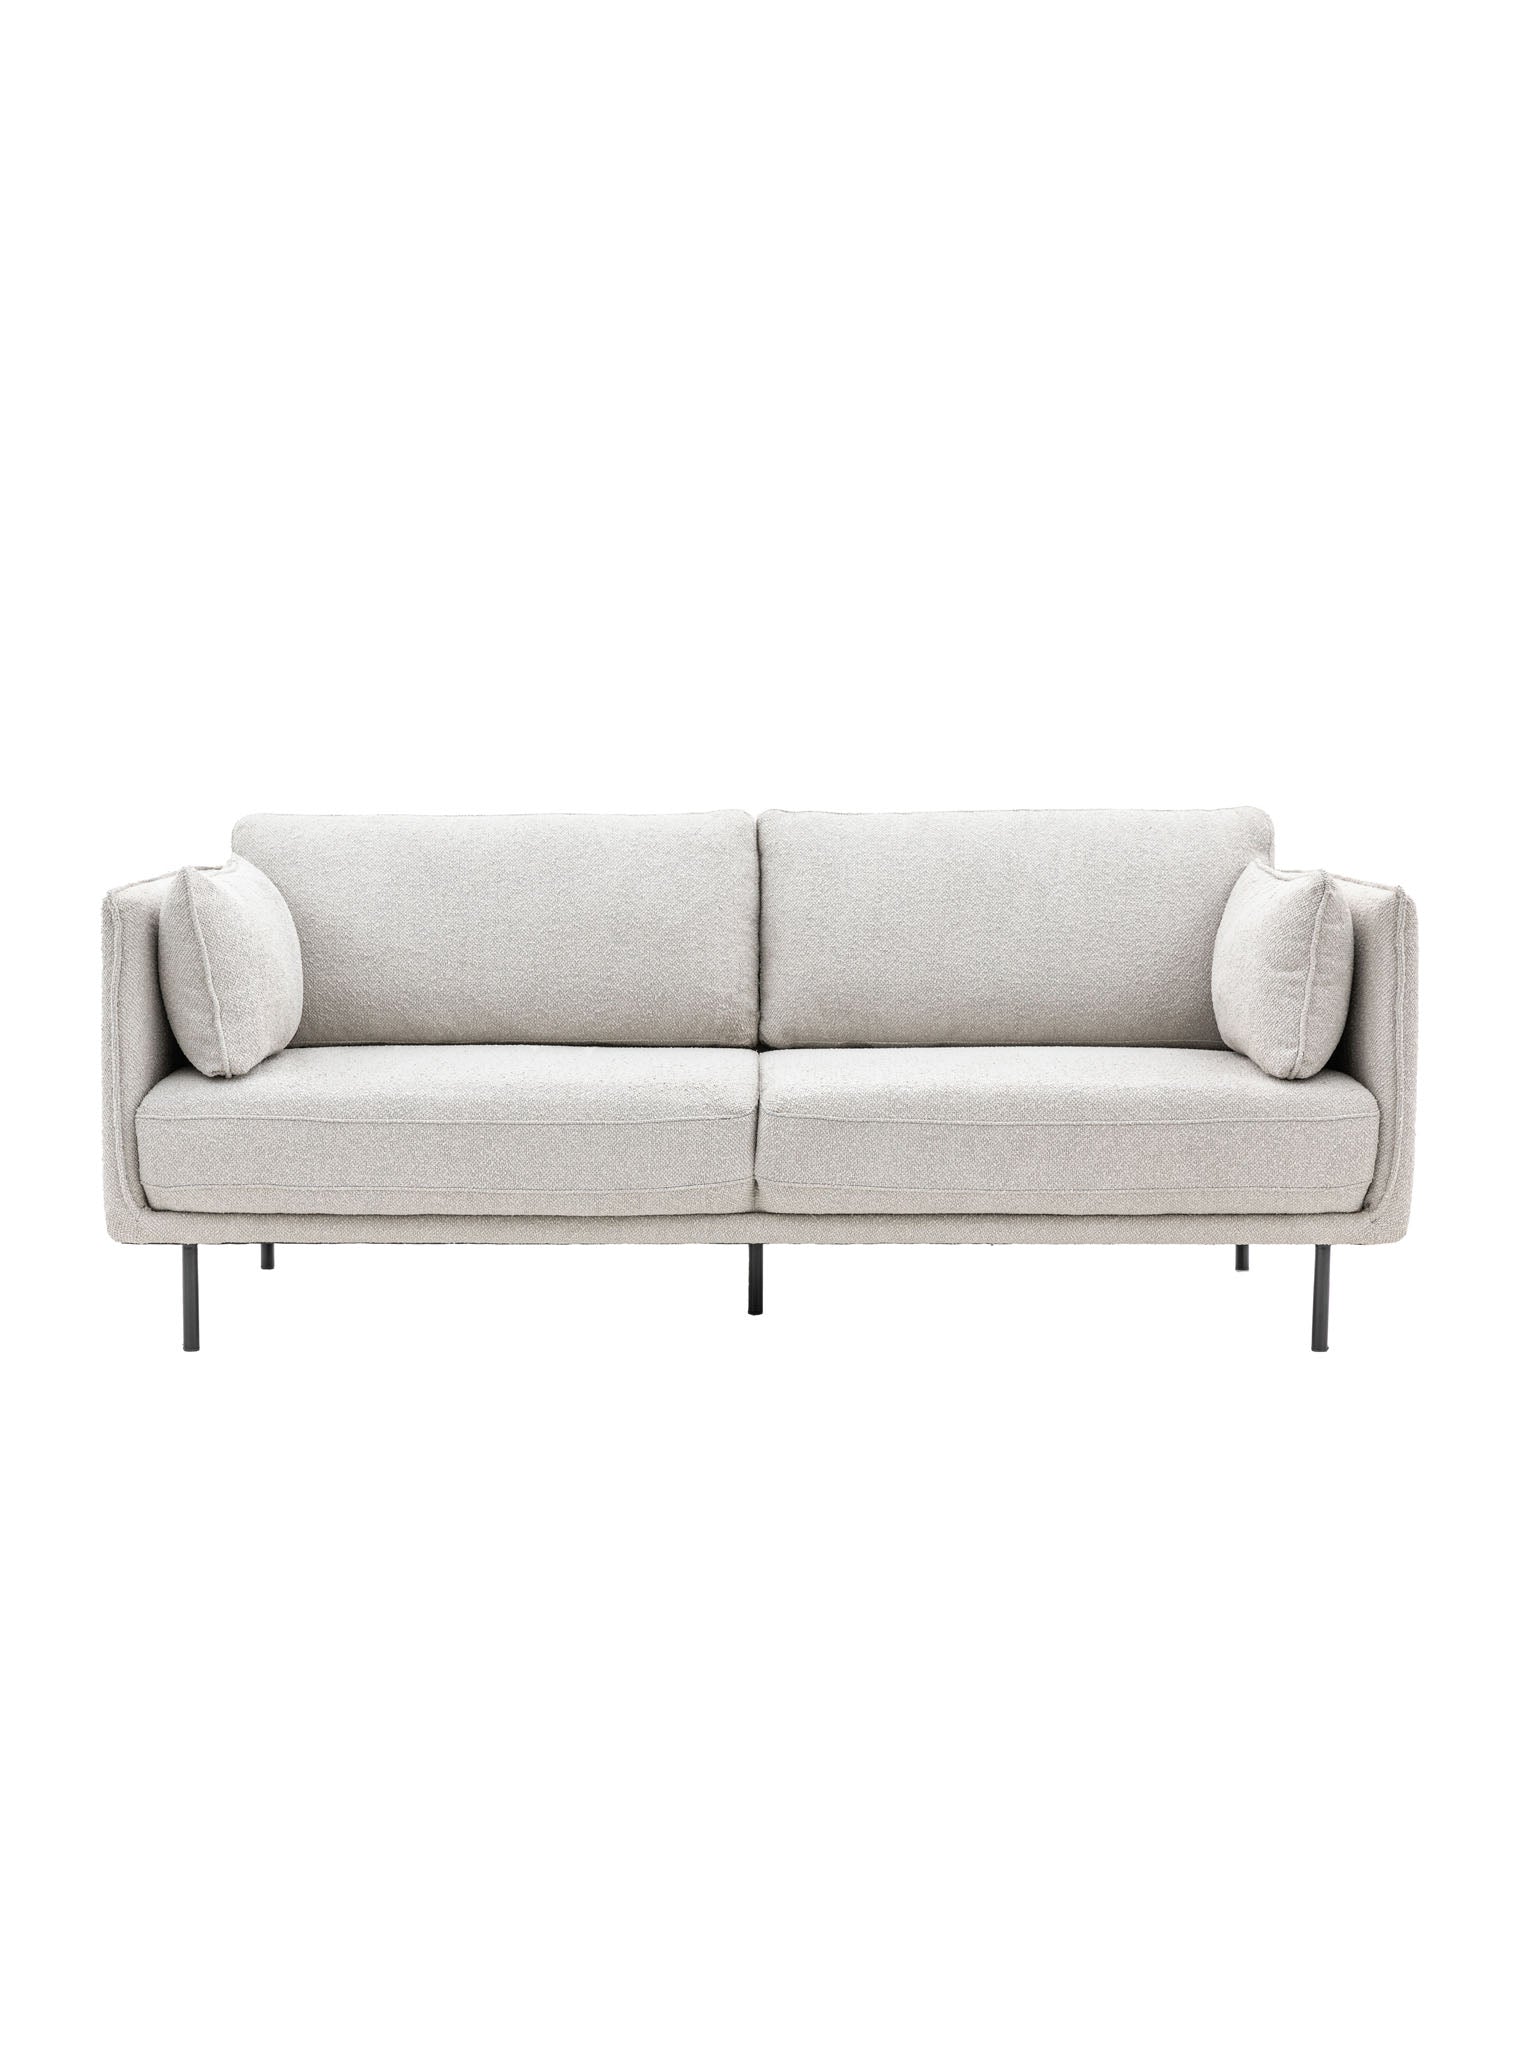 3 seater upholstered sofa with black legs